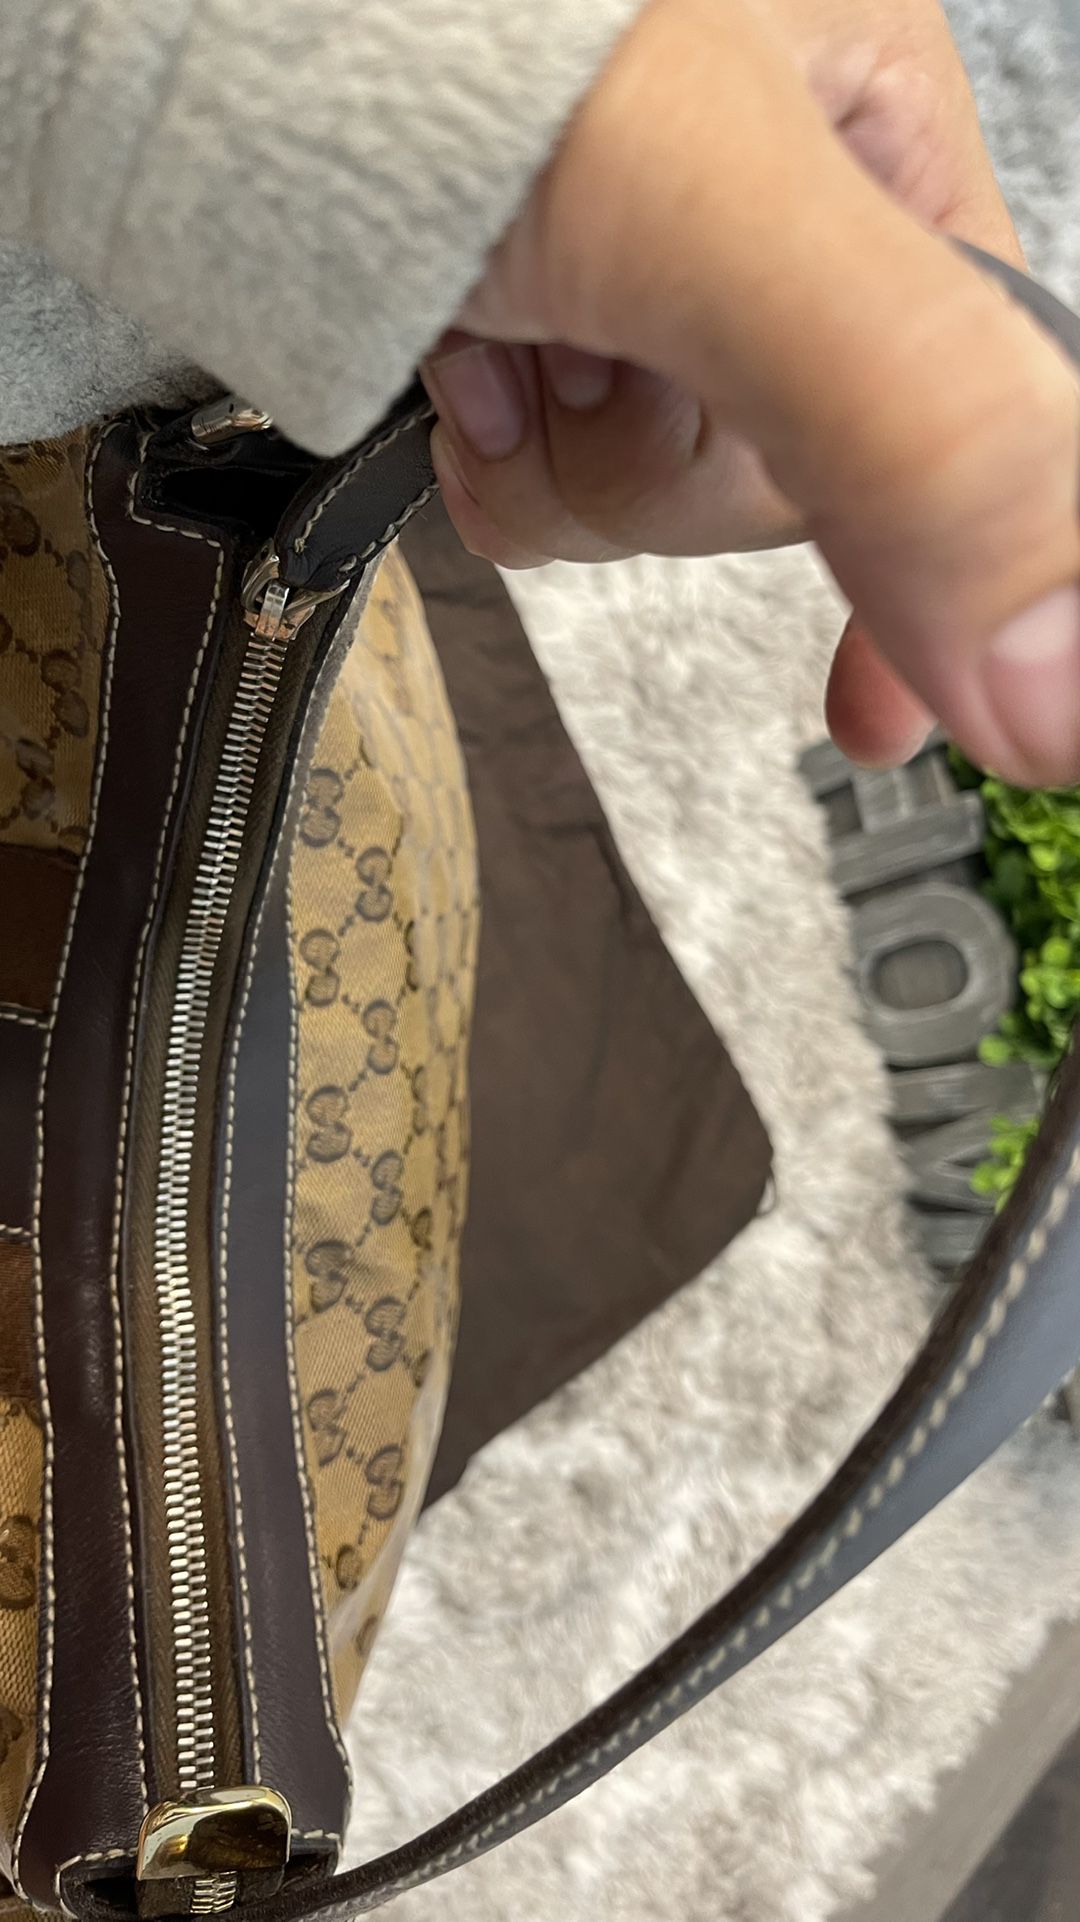 Authentic Gucci Horsebit Signature Canvas Bag for Sale in Willowbrook, IL -  OfferUp